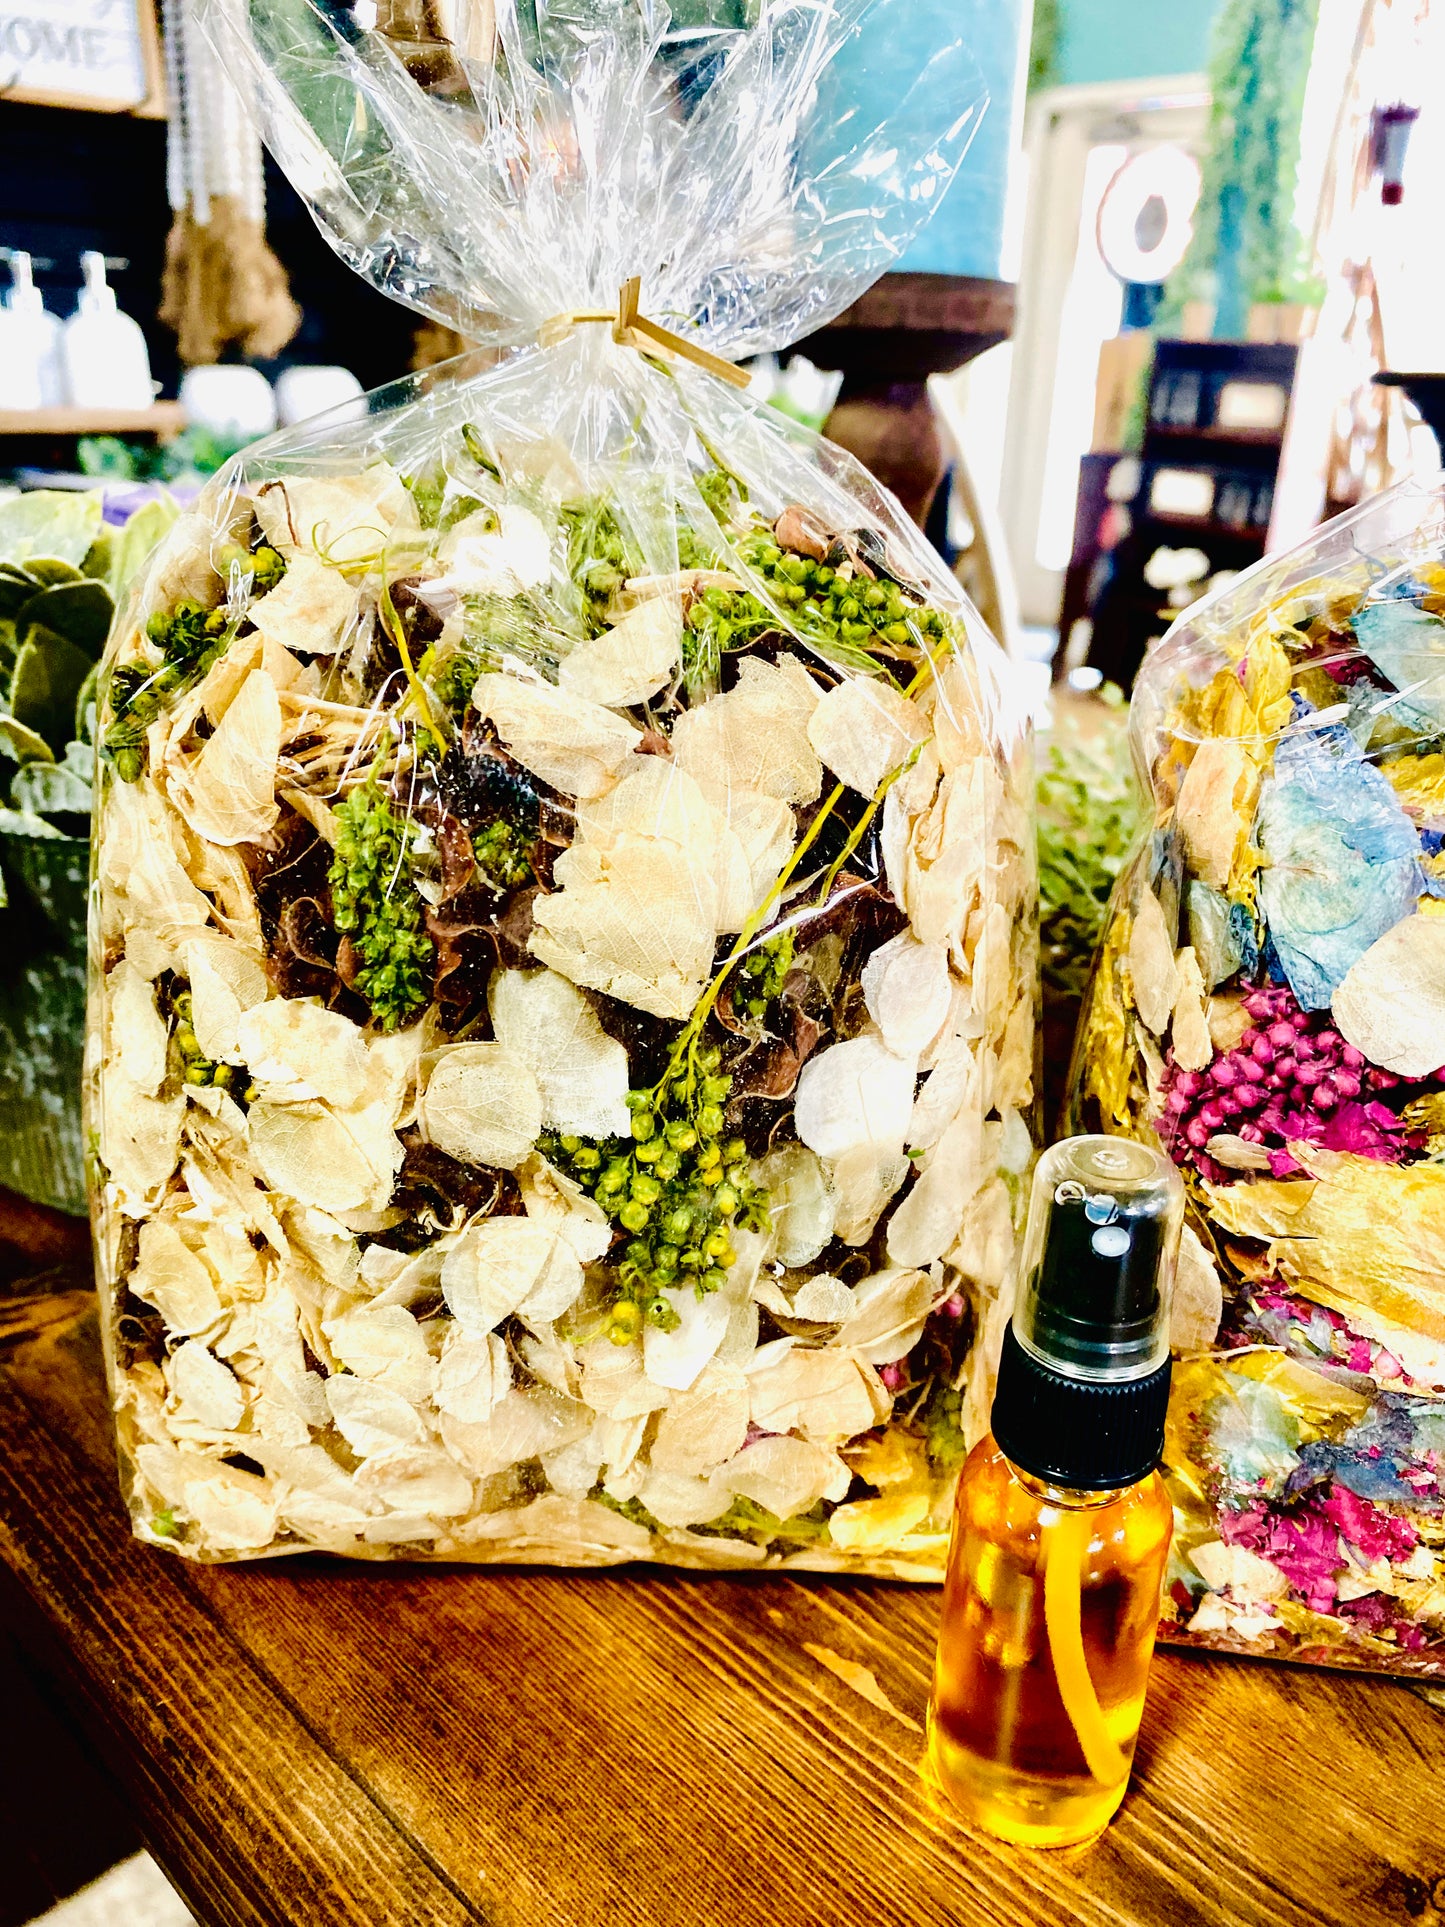 SPRING & SUMMER UNSCENTED BOTANICAL POTPOURRI - Scent YOUR way!!